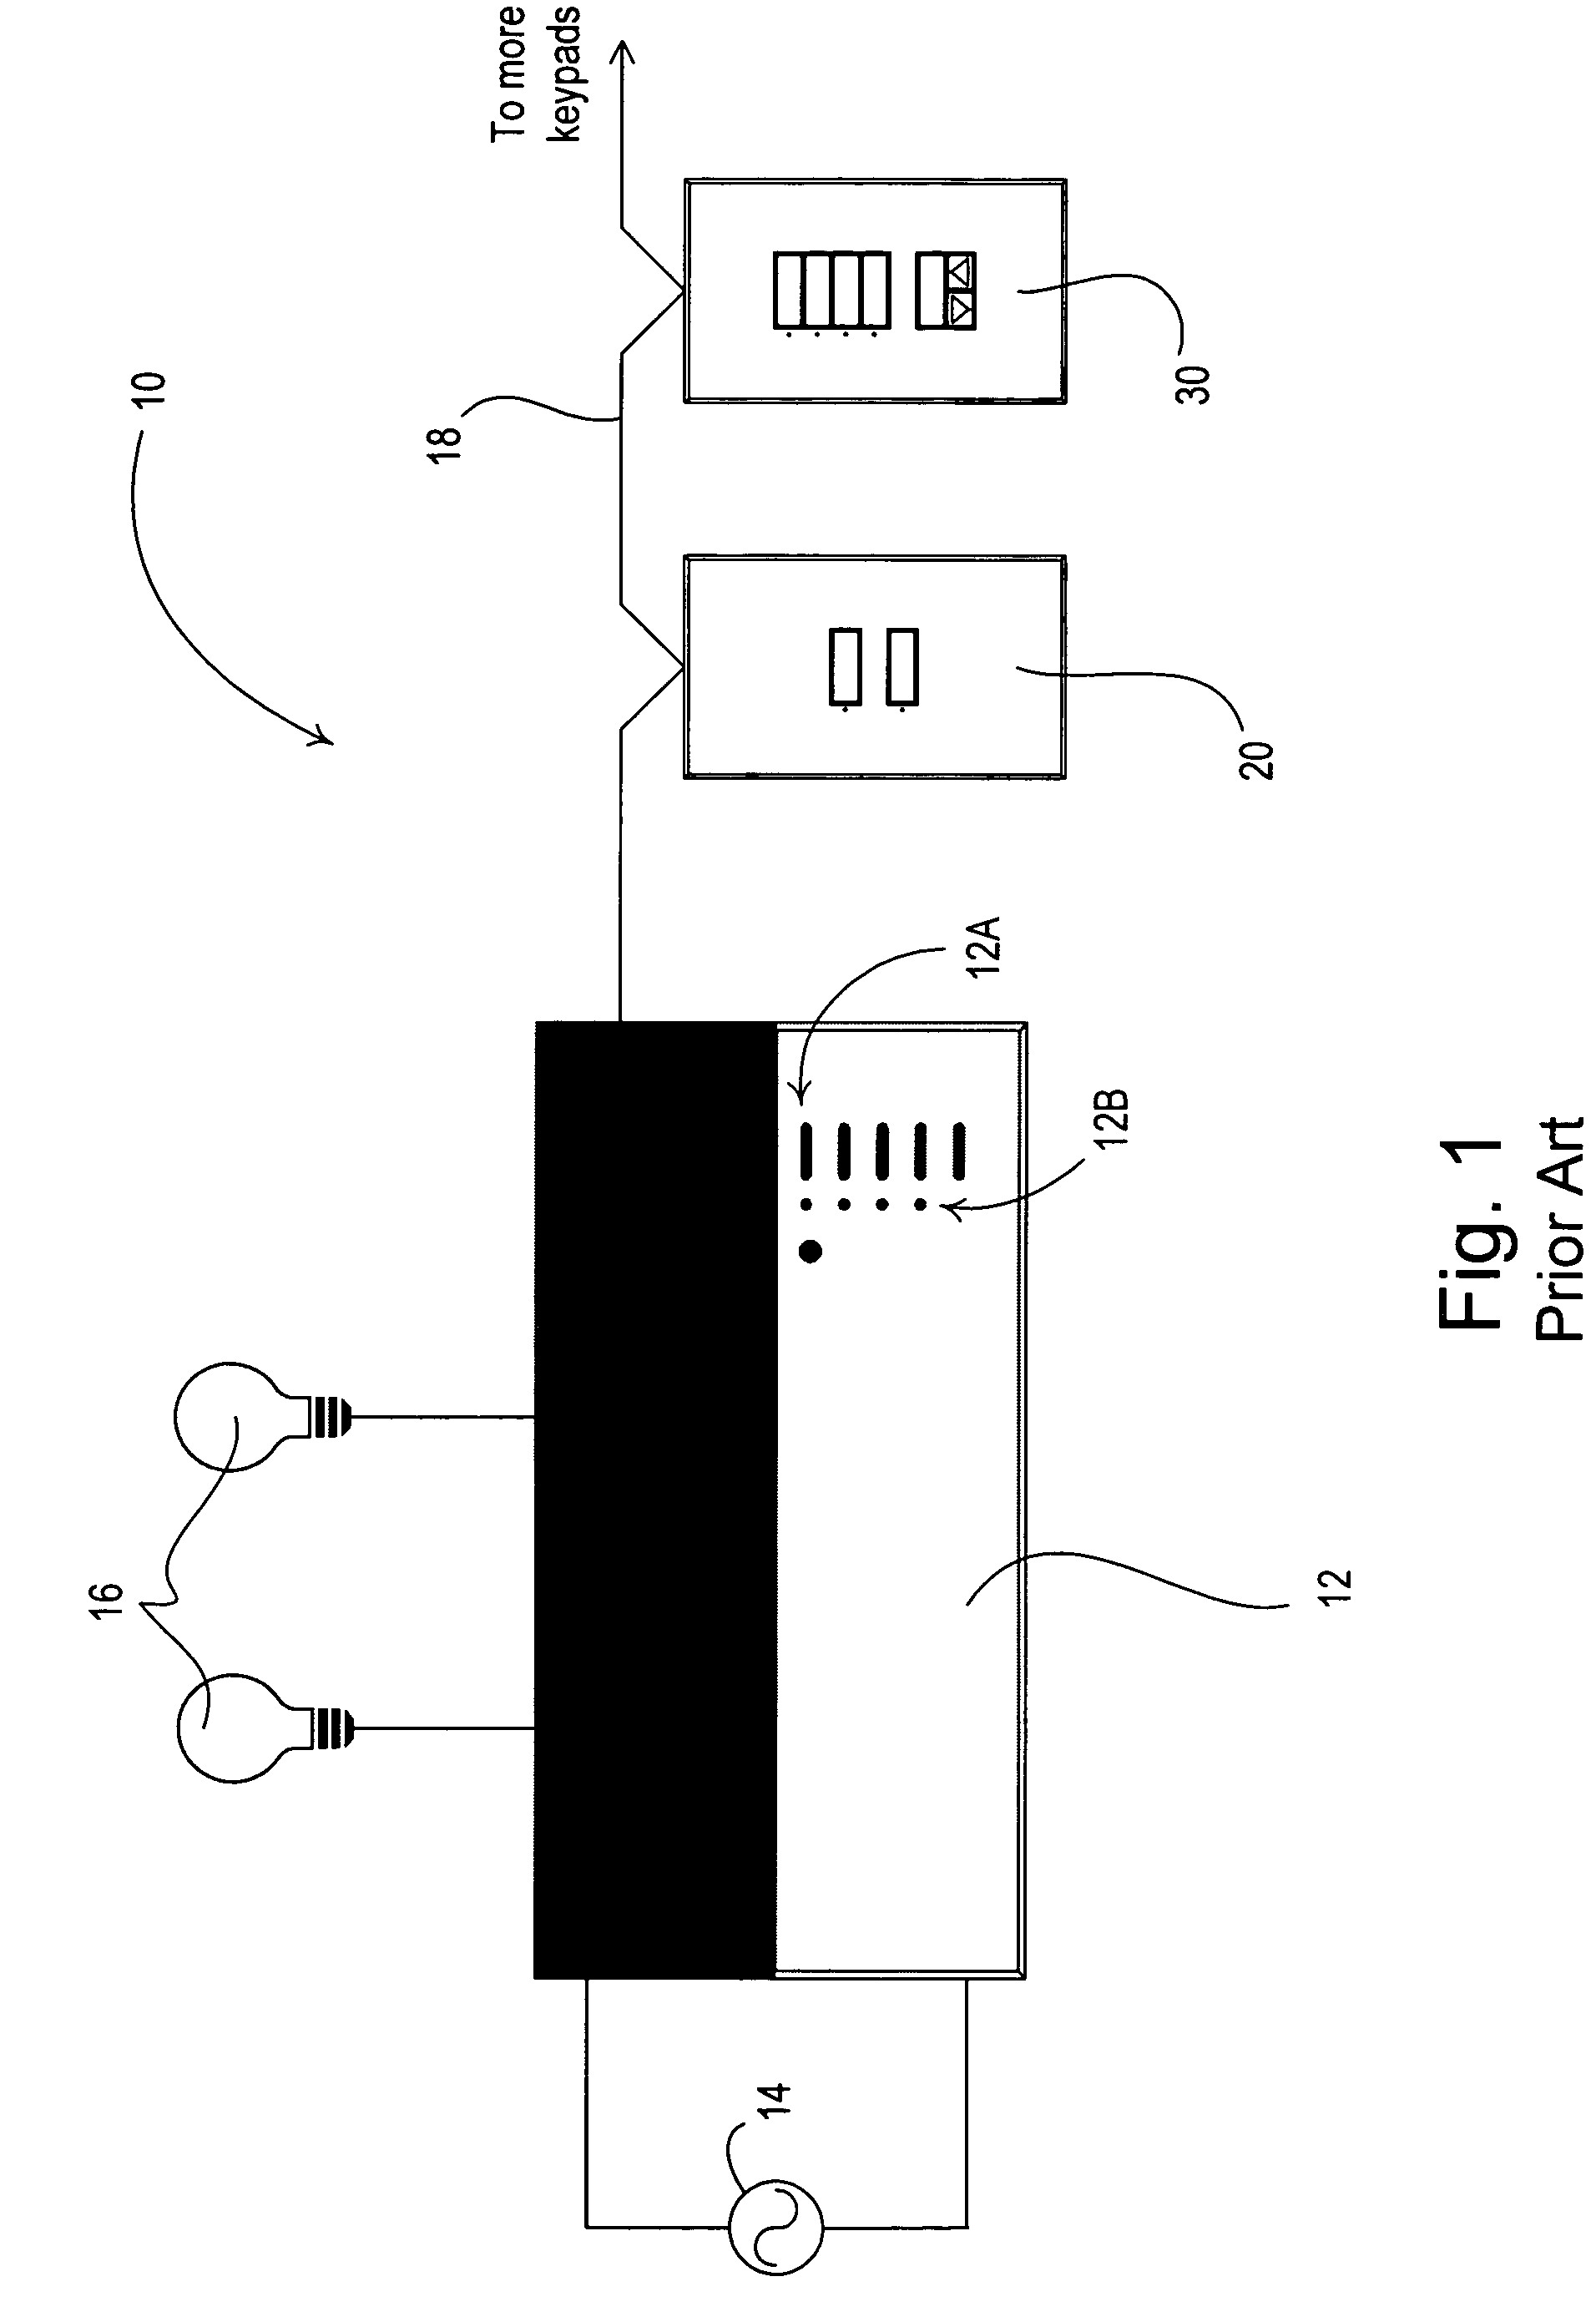 Method of configuring a keypad of a load control system